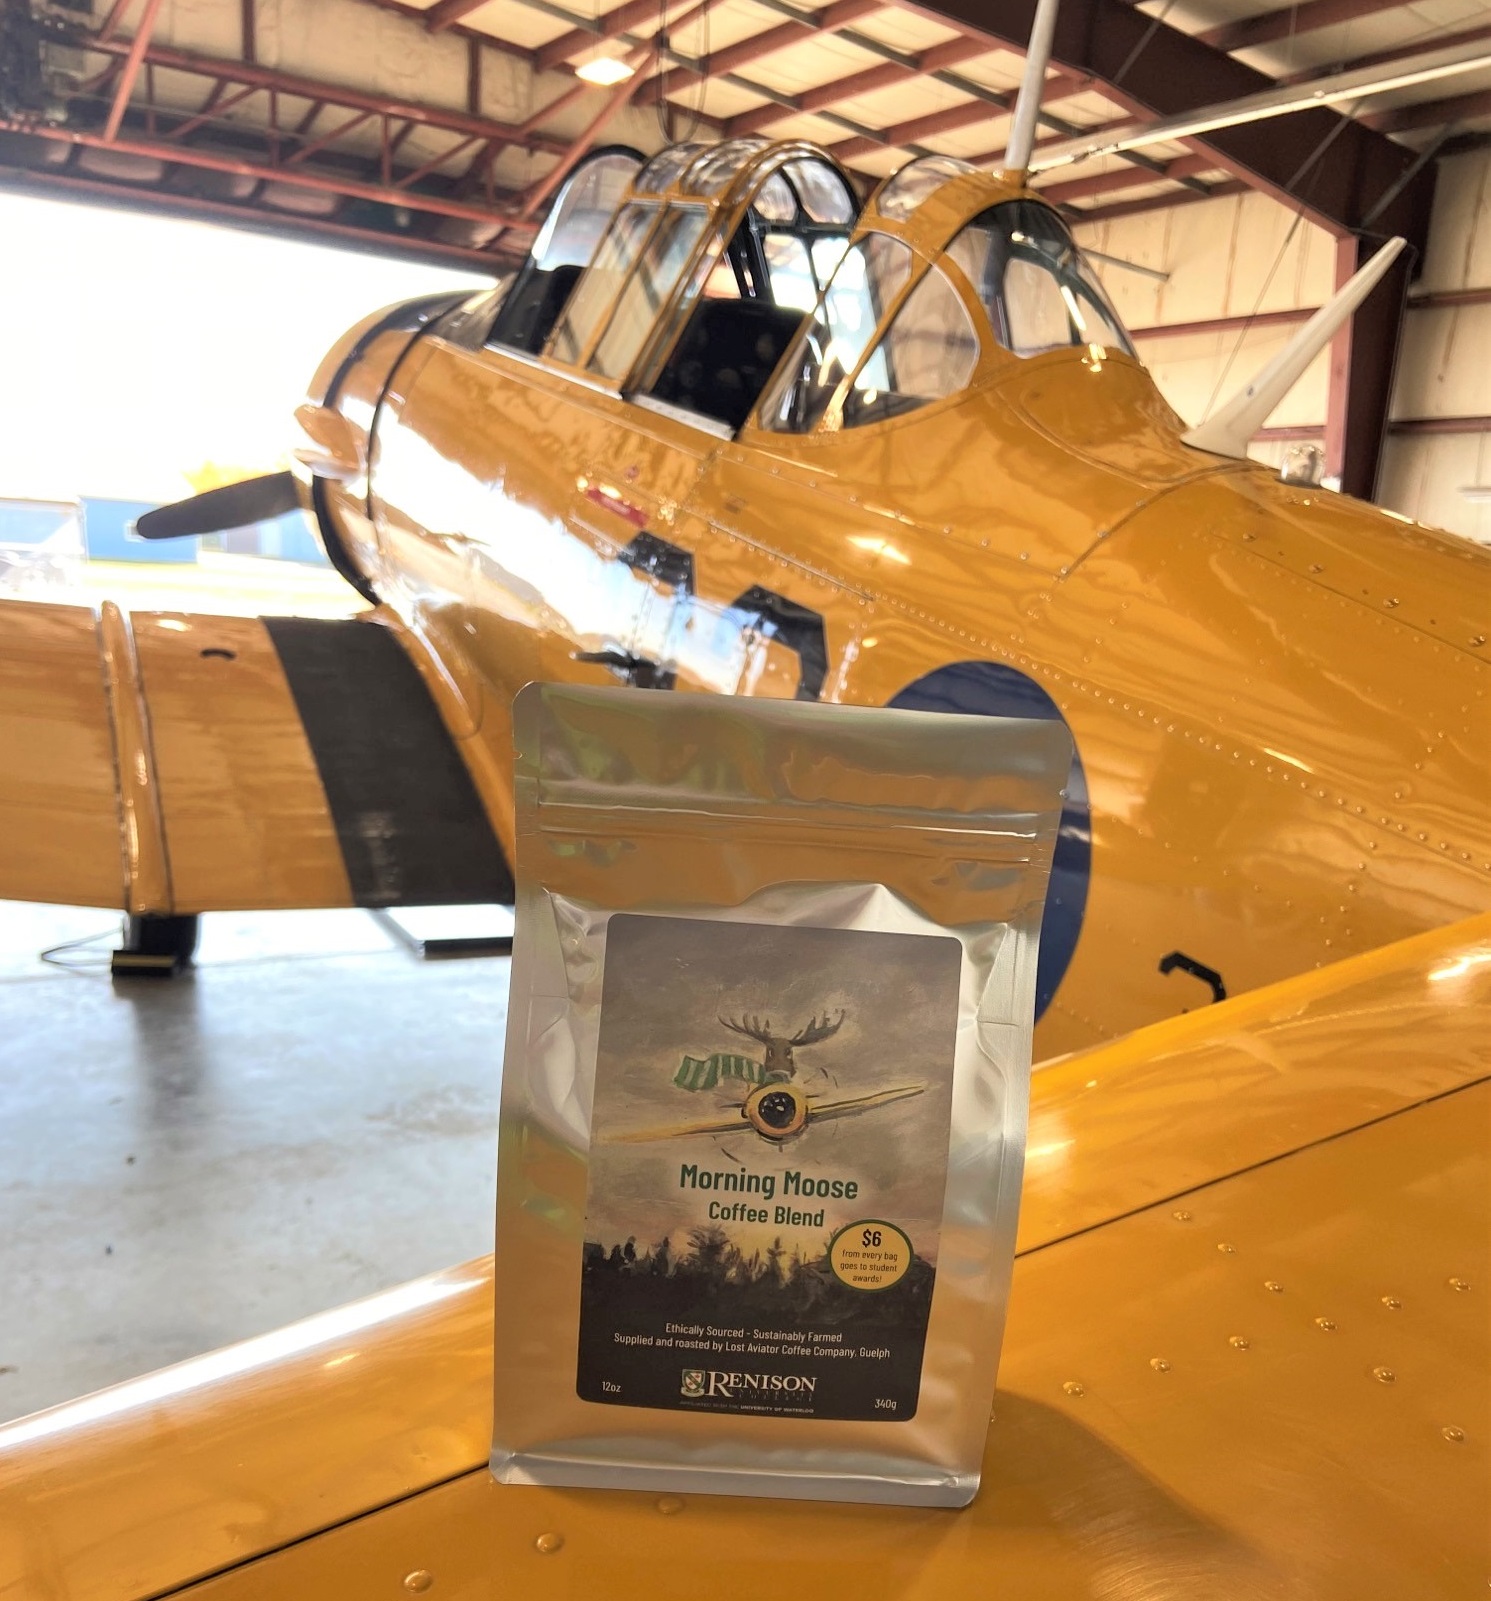 A bag of Renison coffee sitting on the wing of a yellow aircraft